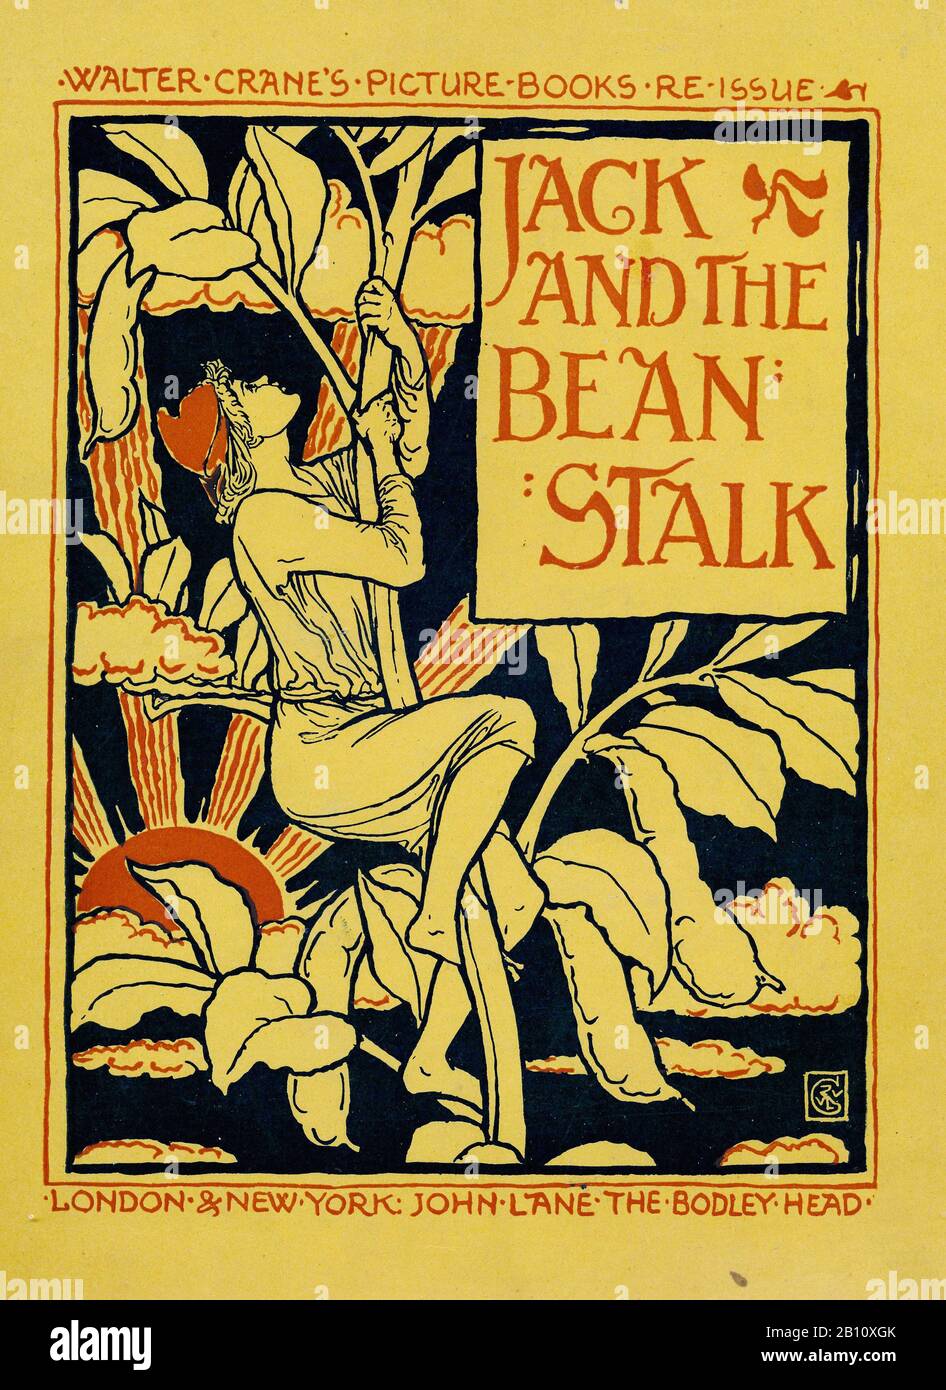 Jack and the bean stalk cover - Illustration by Walter Cane (1845 - 1915) Stock Photo